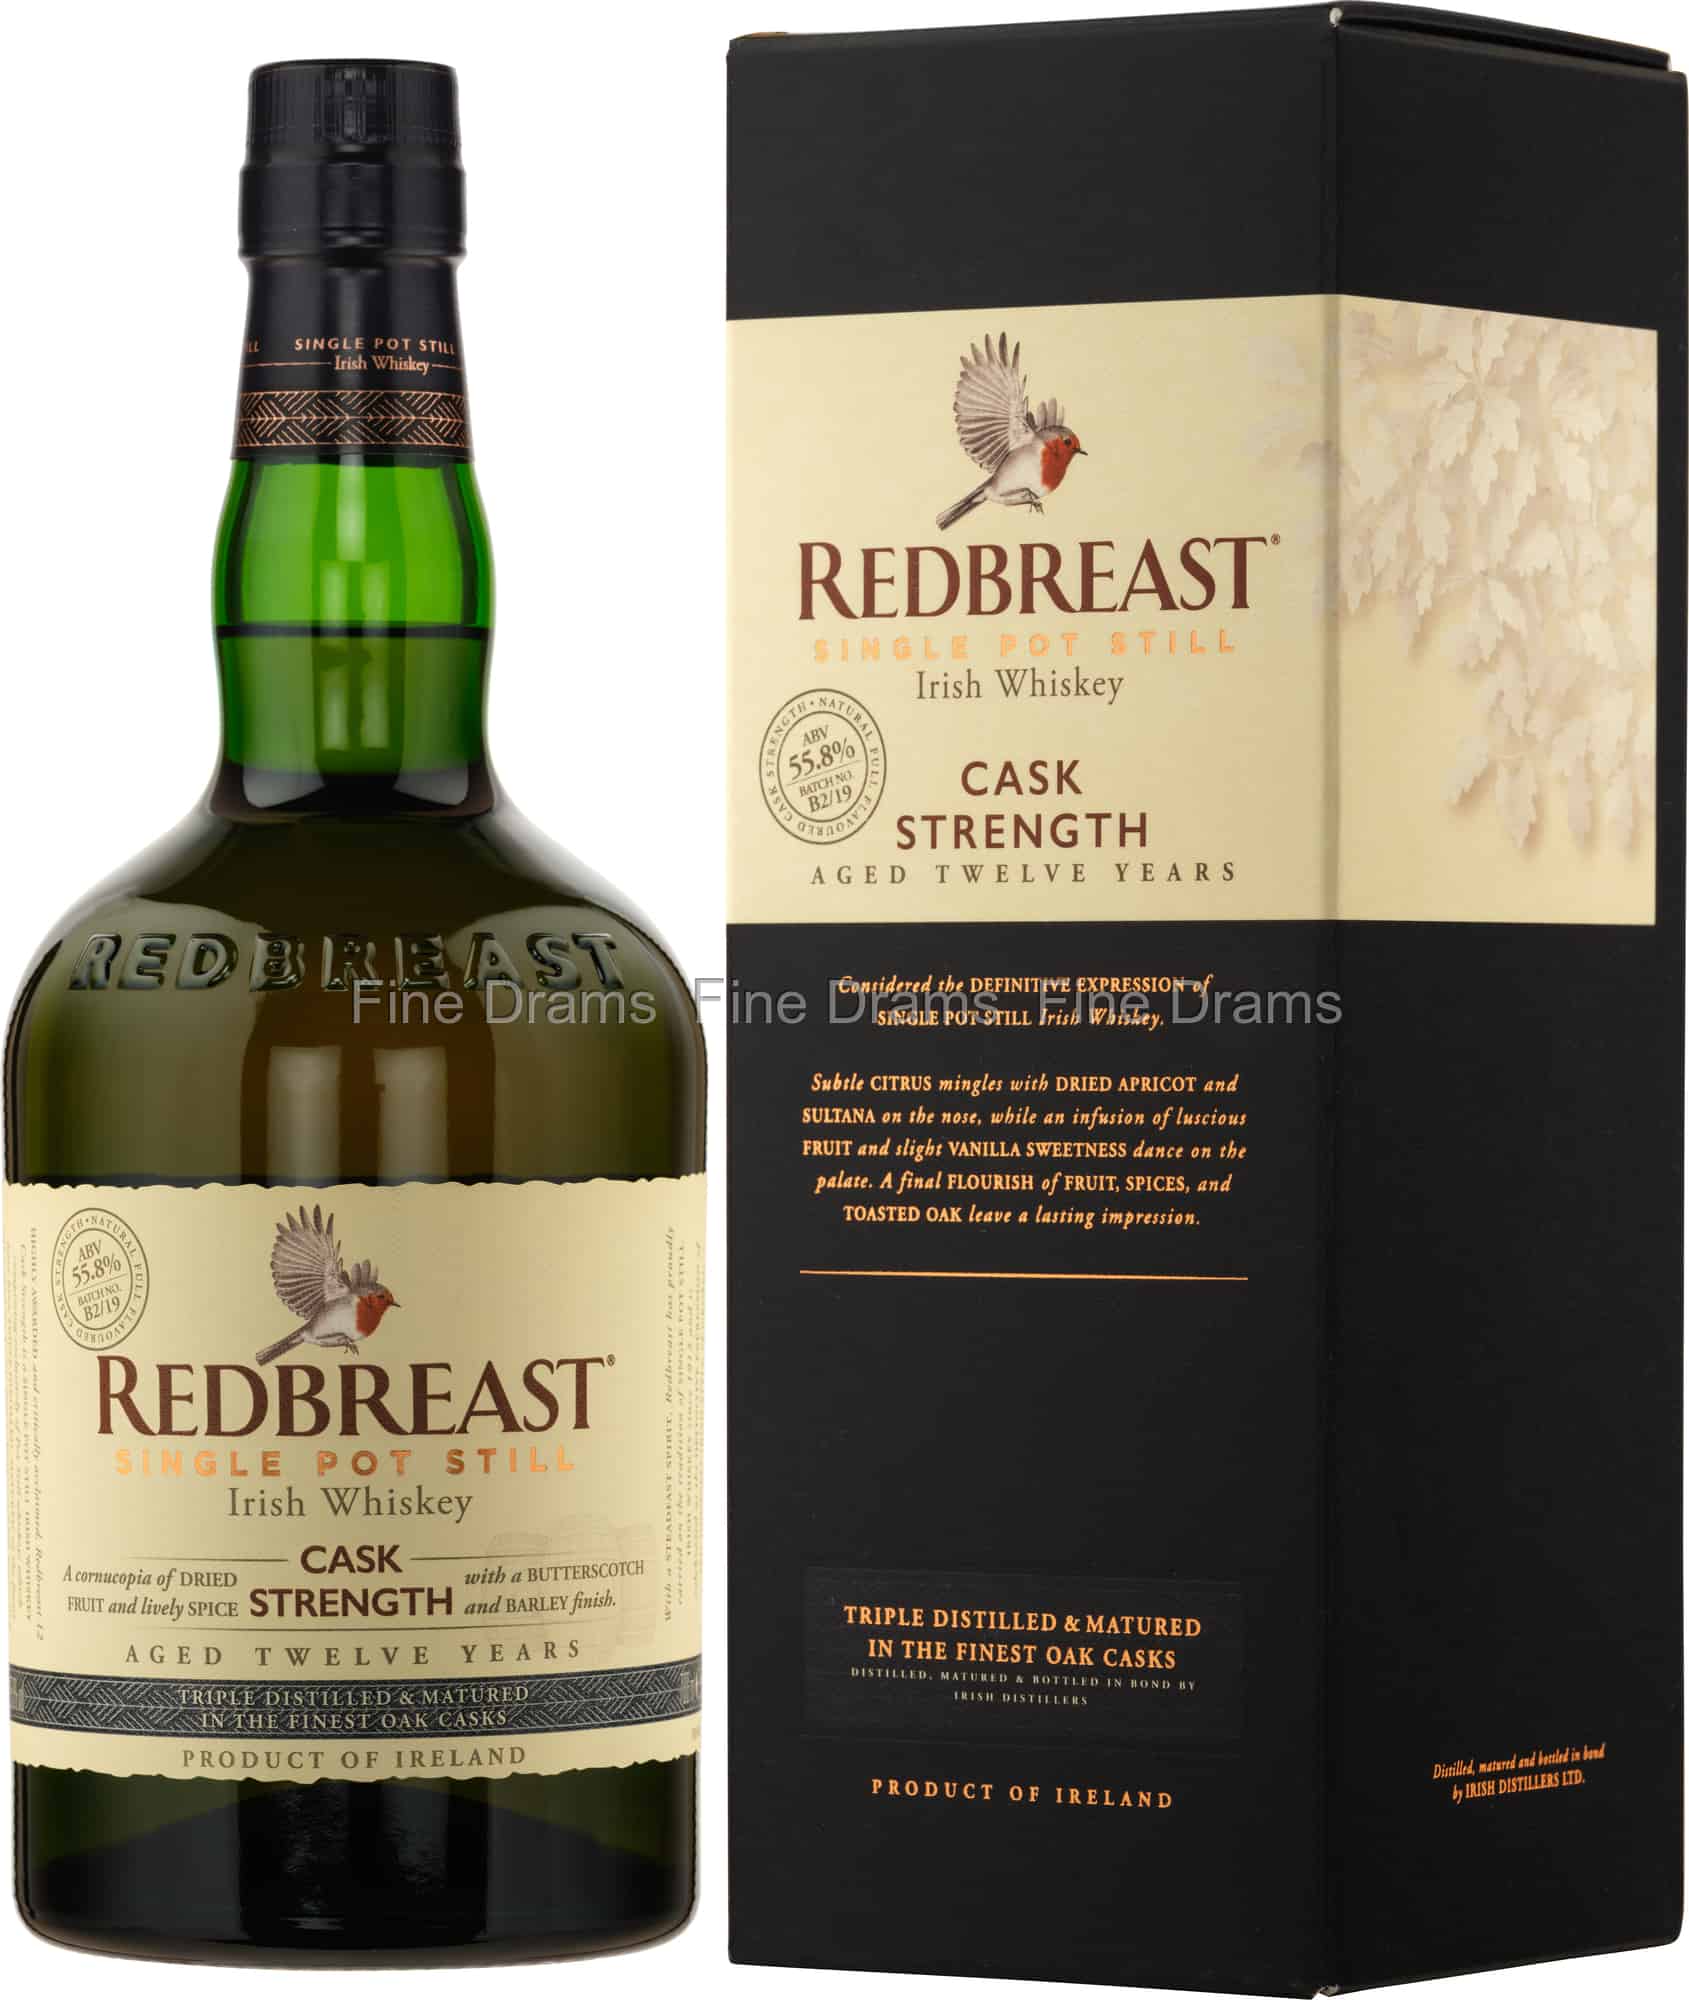 Review #155 – Redbreast 12 Year Cask Strength